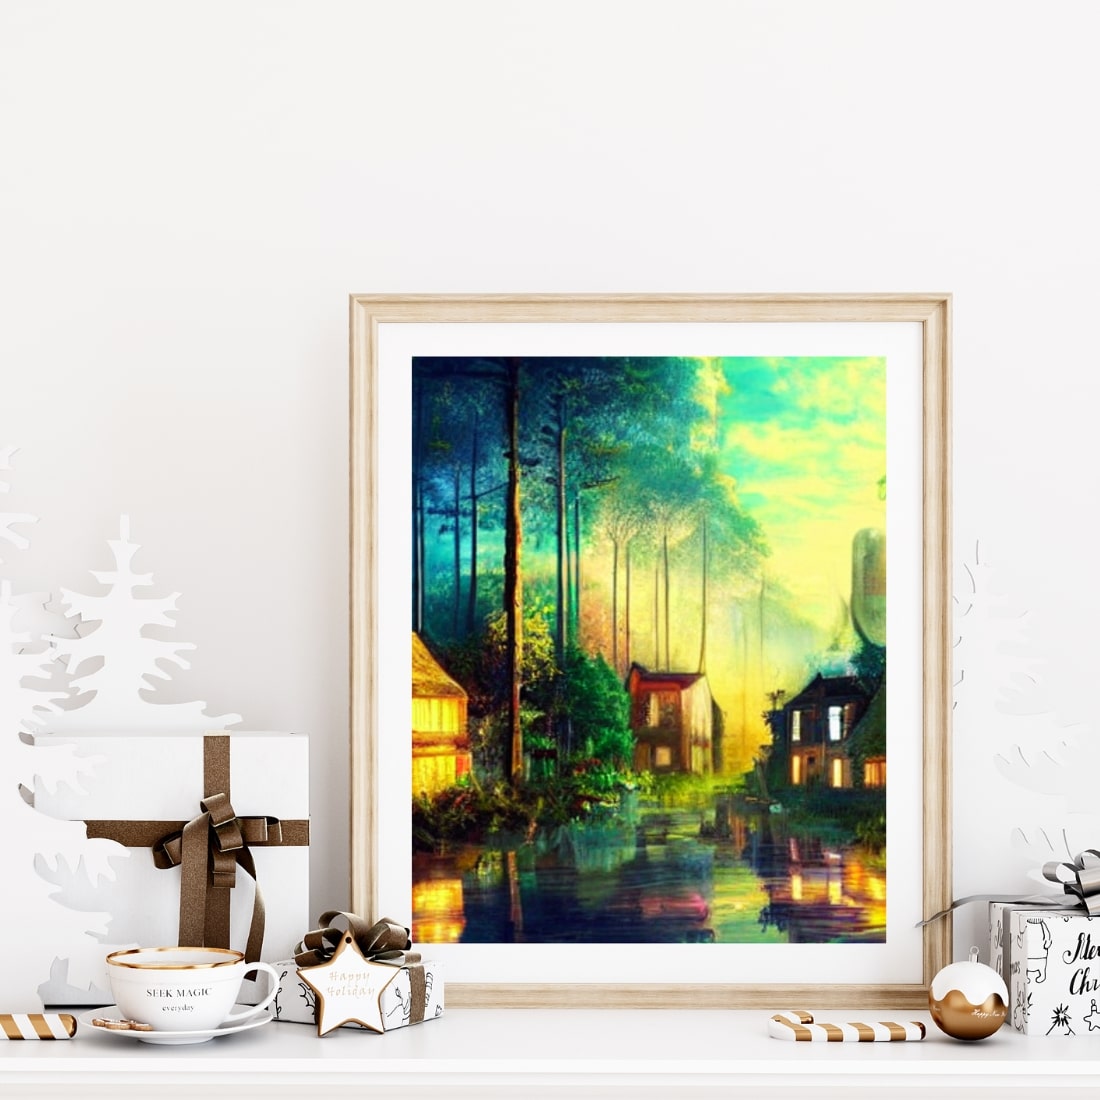 sublime nature, Winter Wonderland wall art printable preview image.